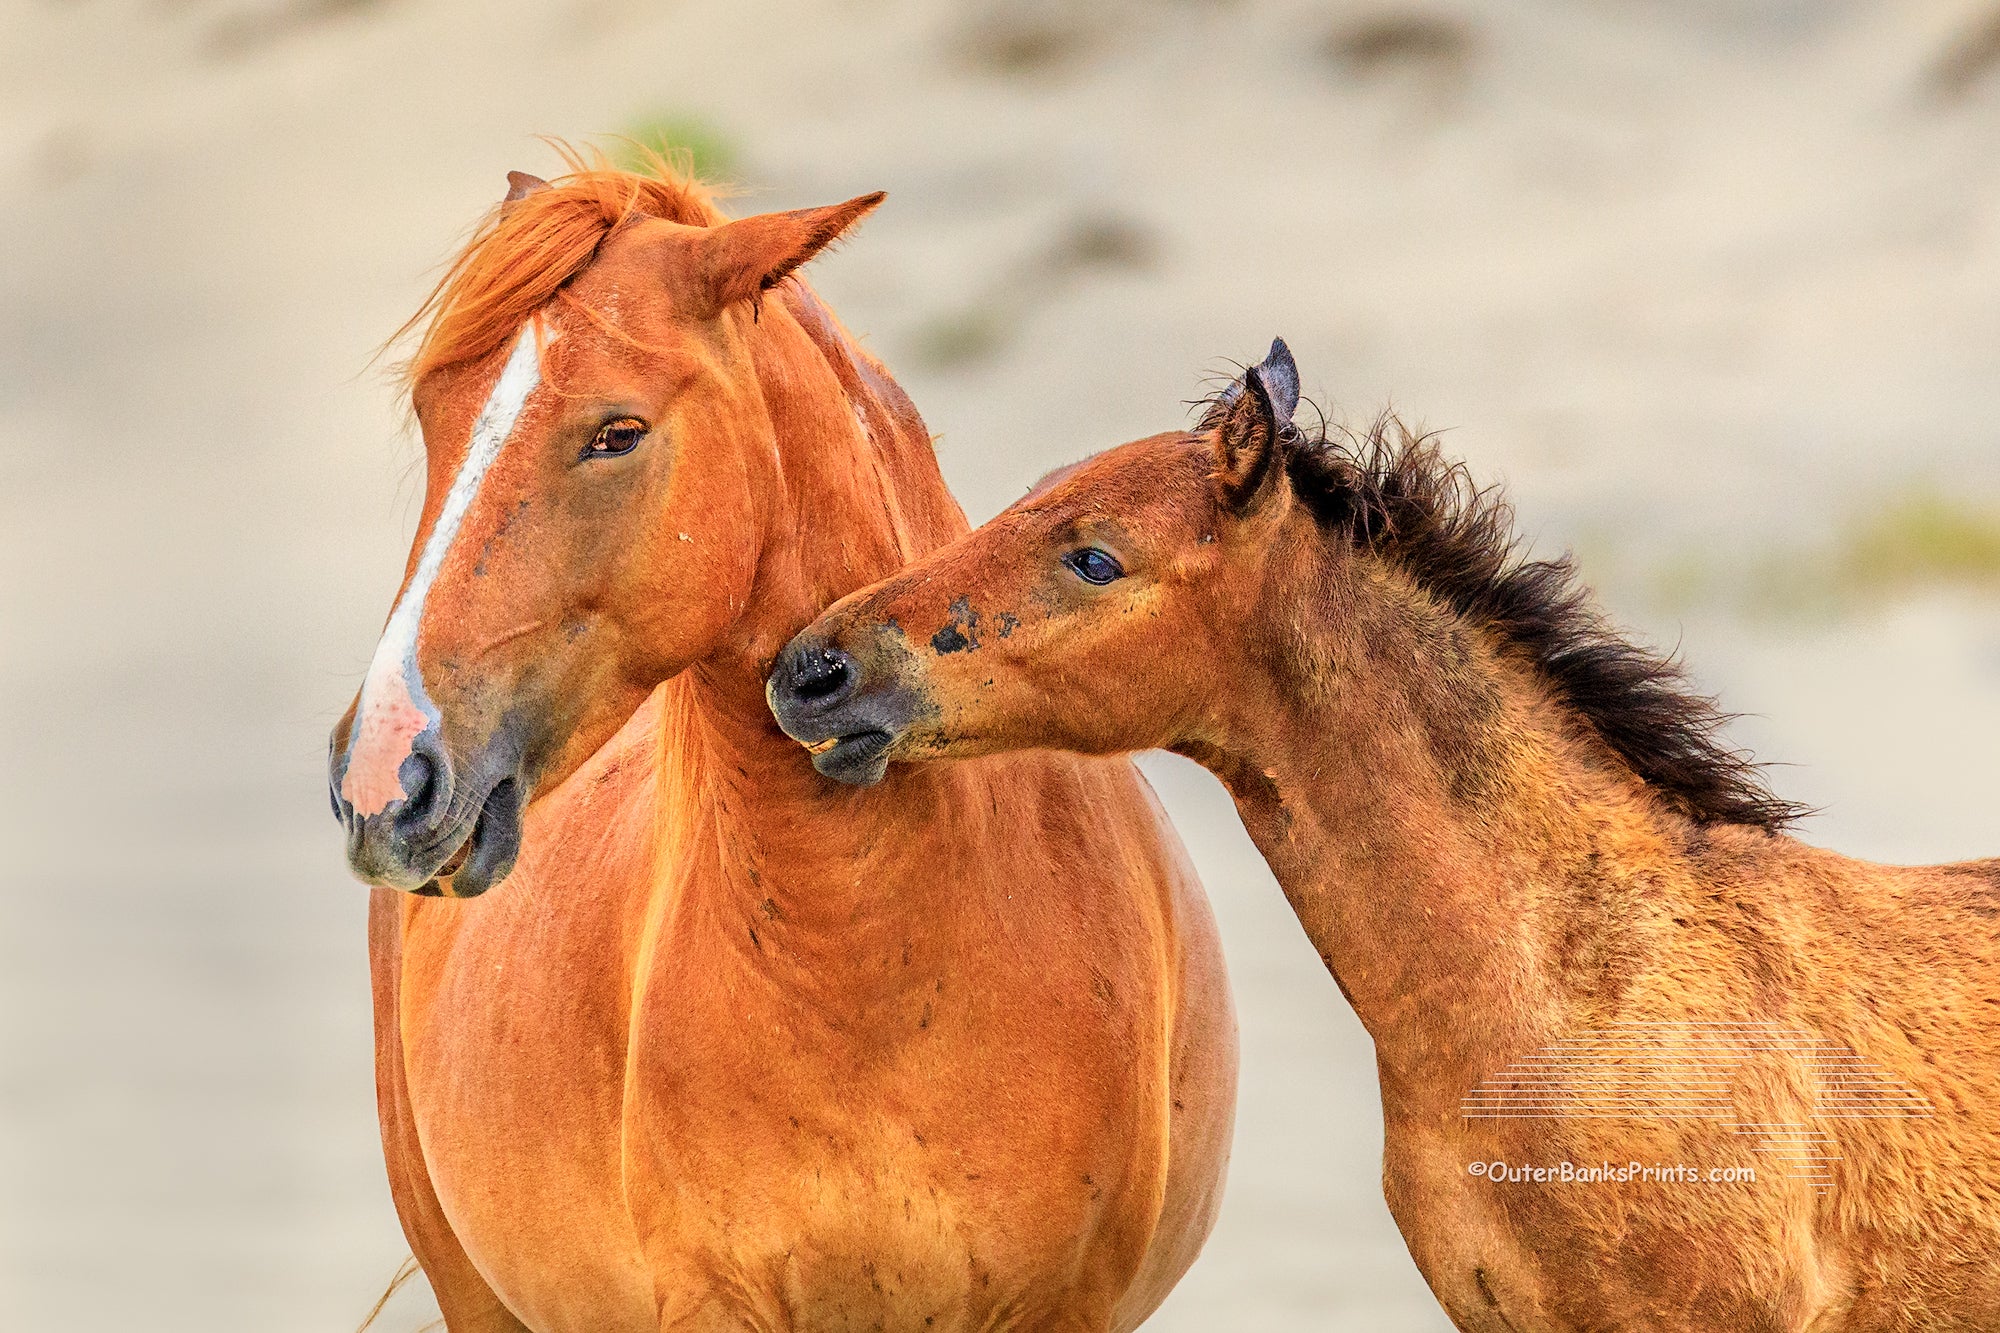 A mother interacting with her colt in Carova Beach  on the Outer Banks of North Carolina.